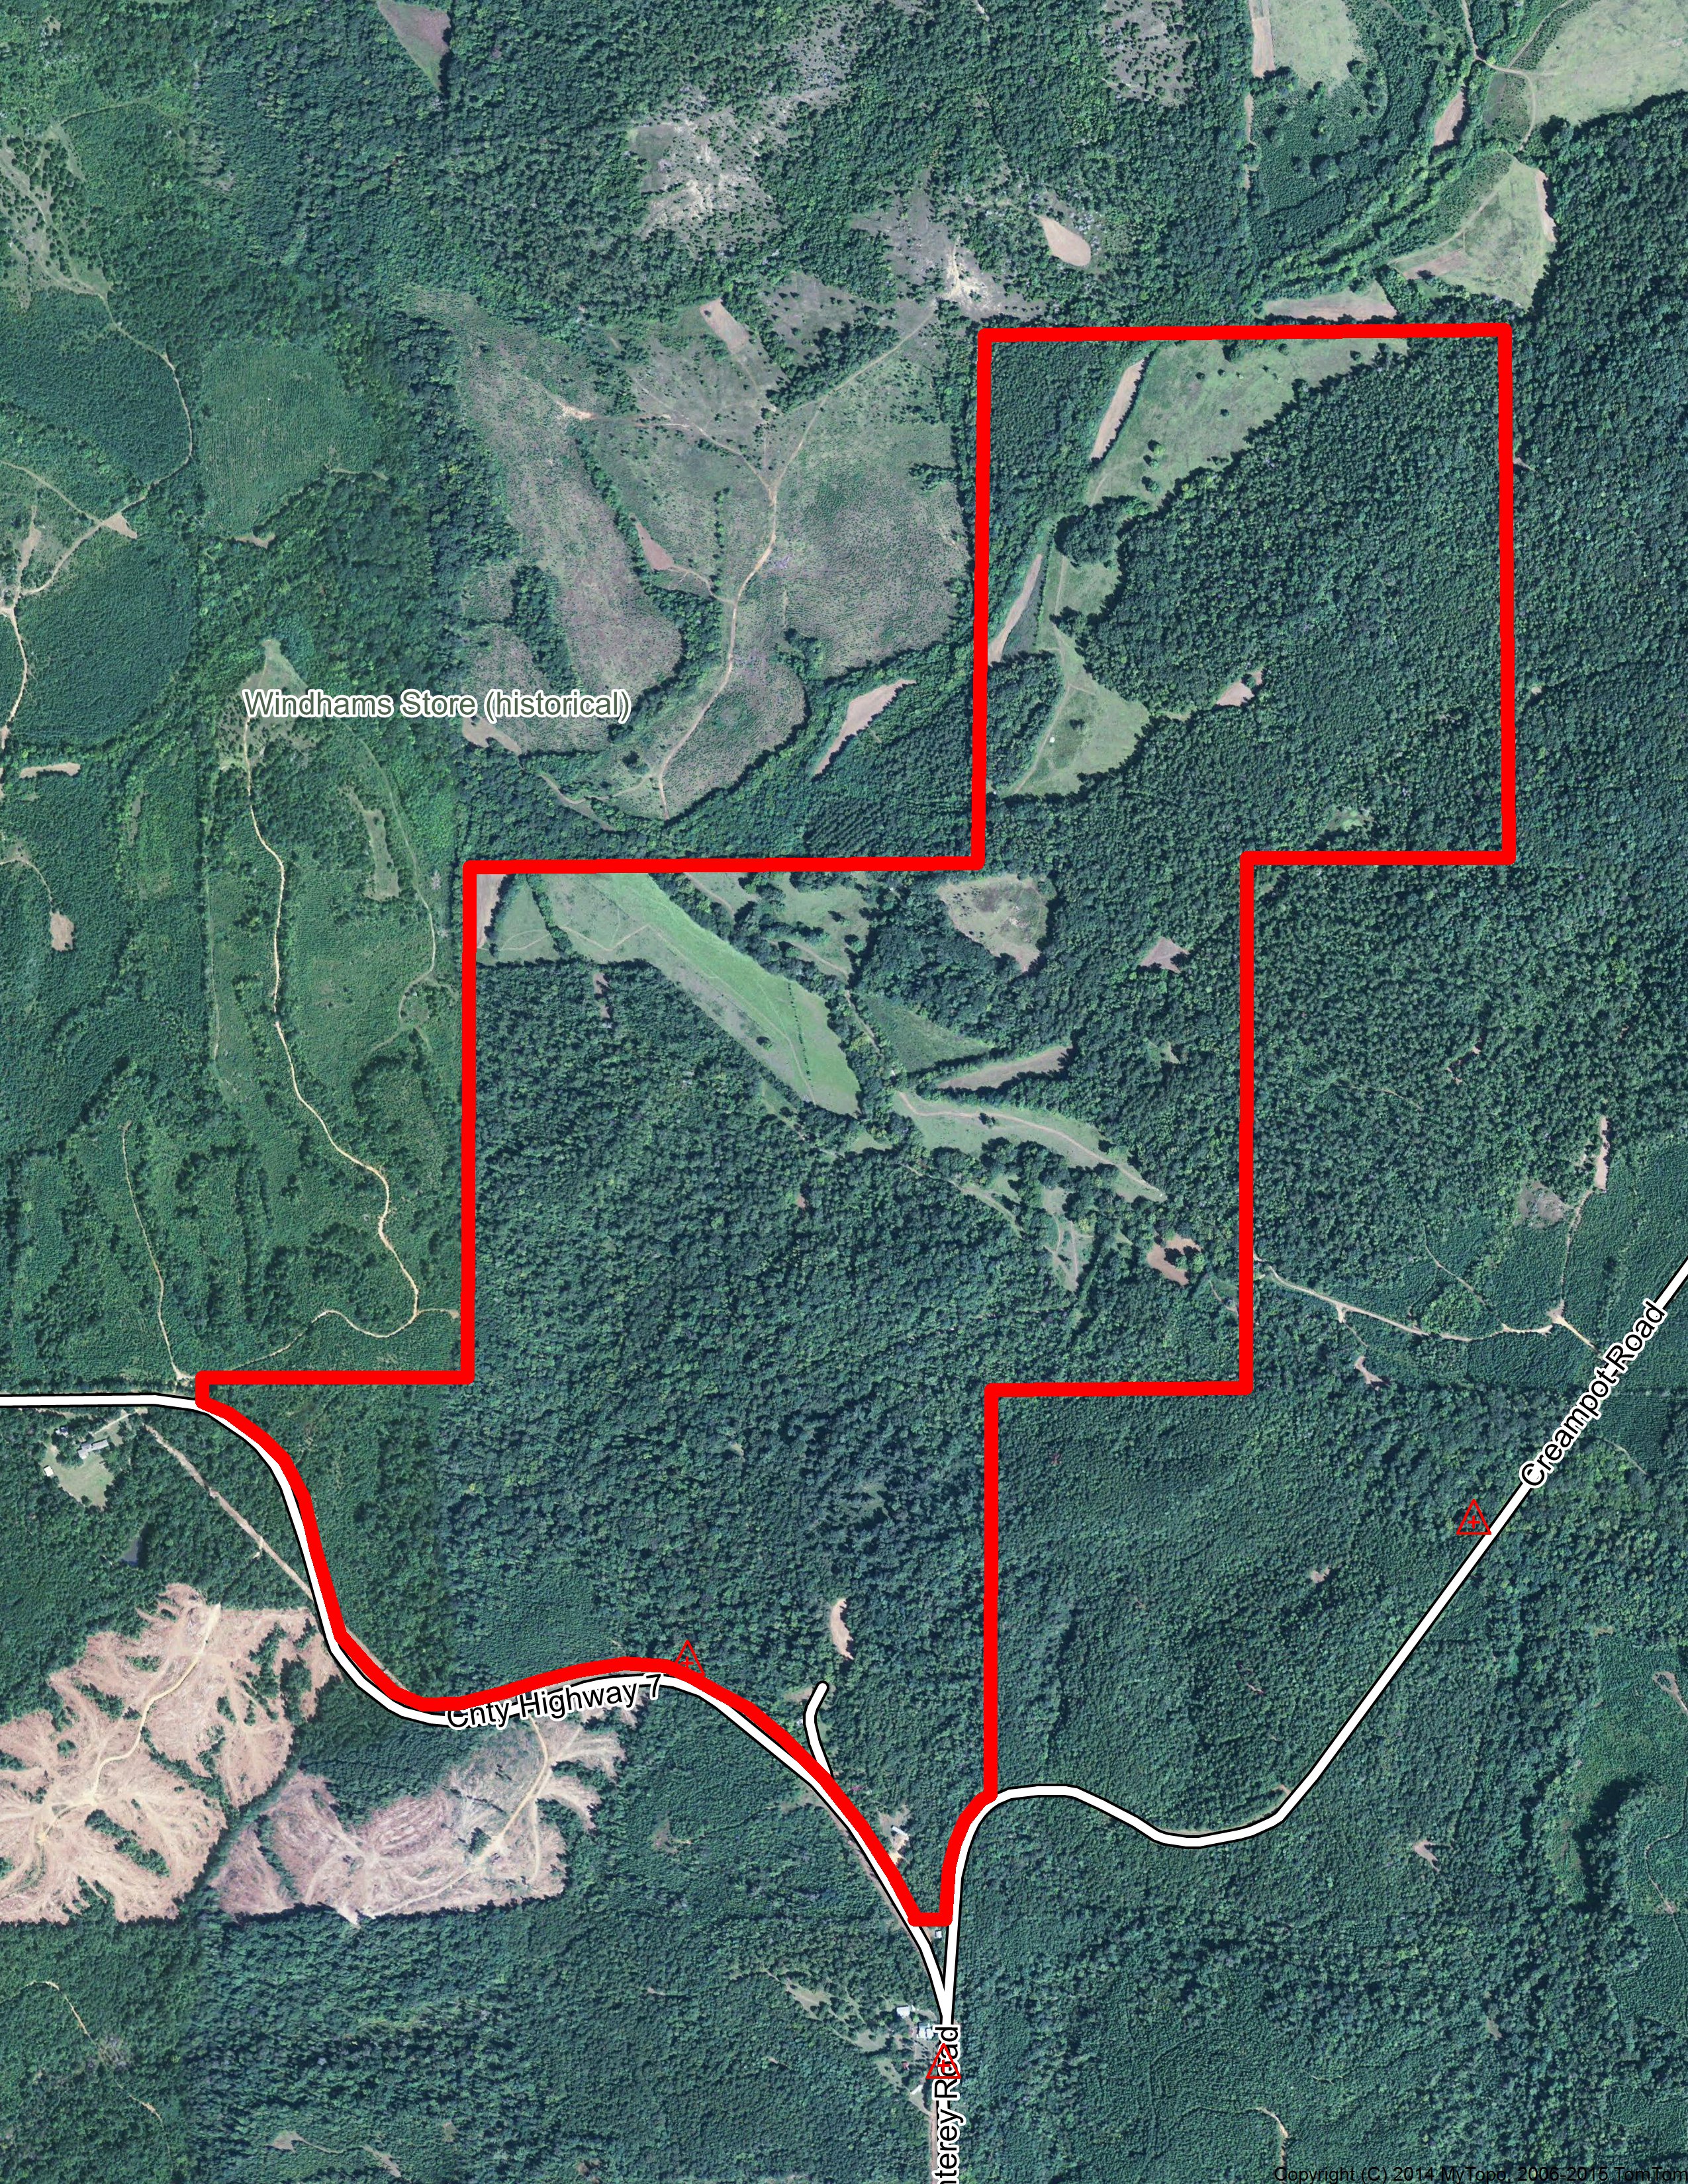 526-Ac.-Butler-Co.-Monterey-Tract-Aerial2